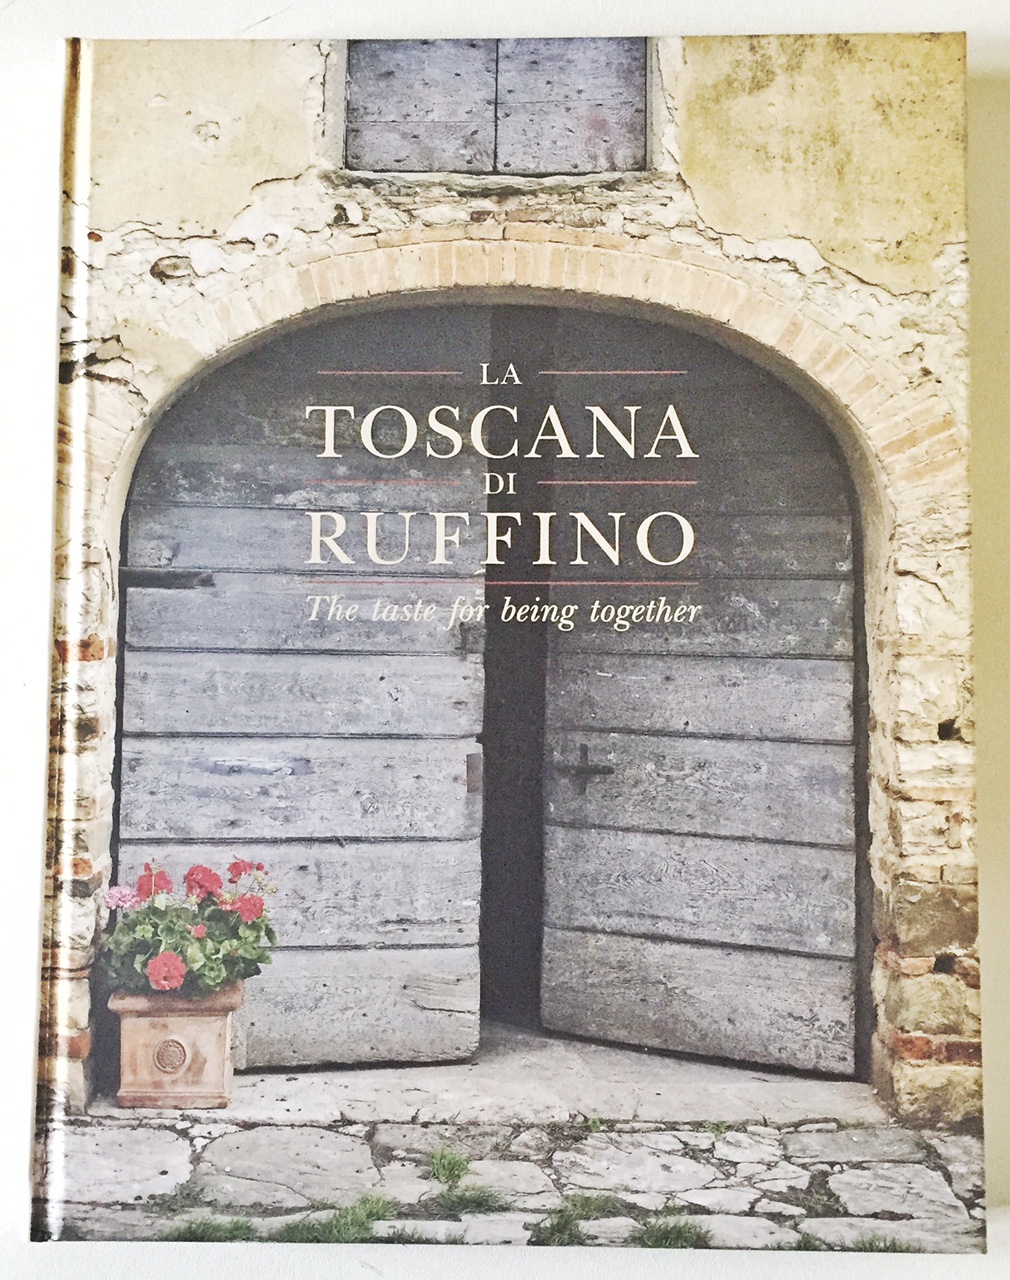 La Toscana di Ruffino offers an insider look at food and wine customs in Tuscany today.